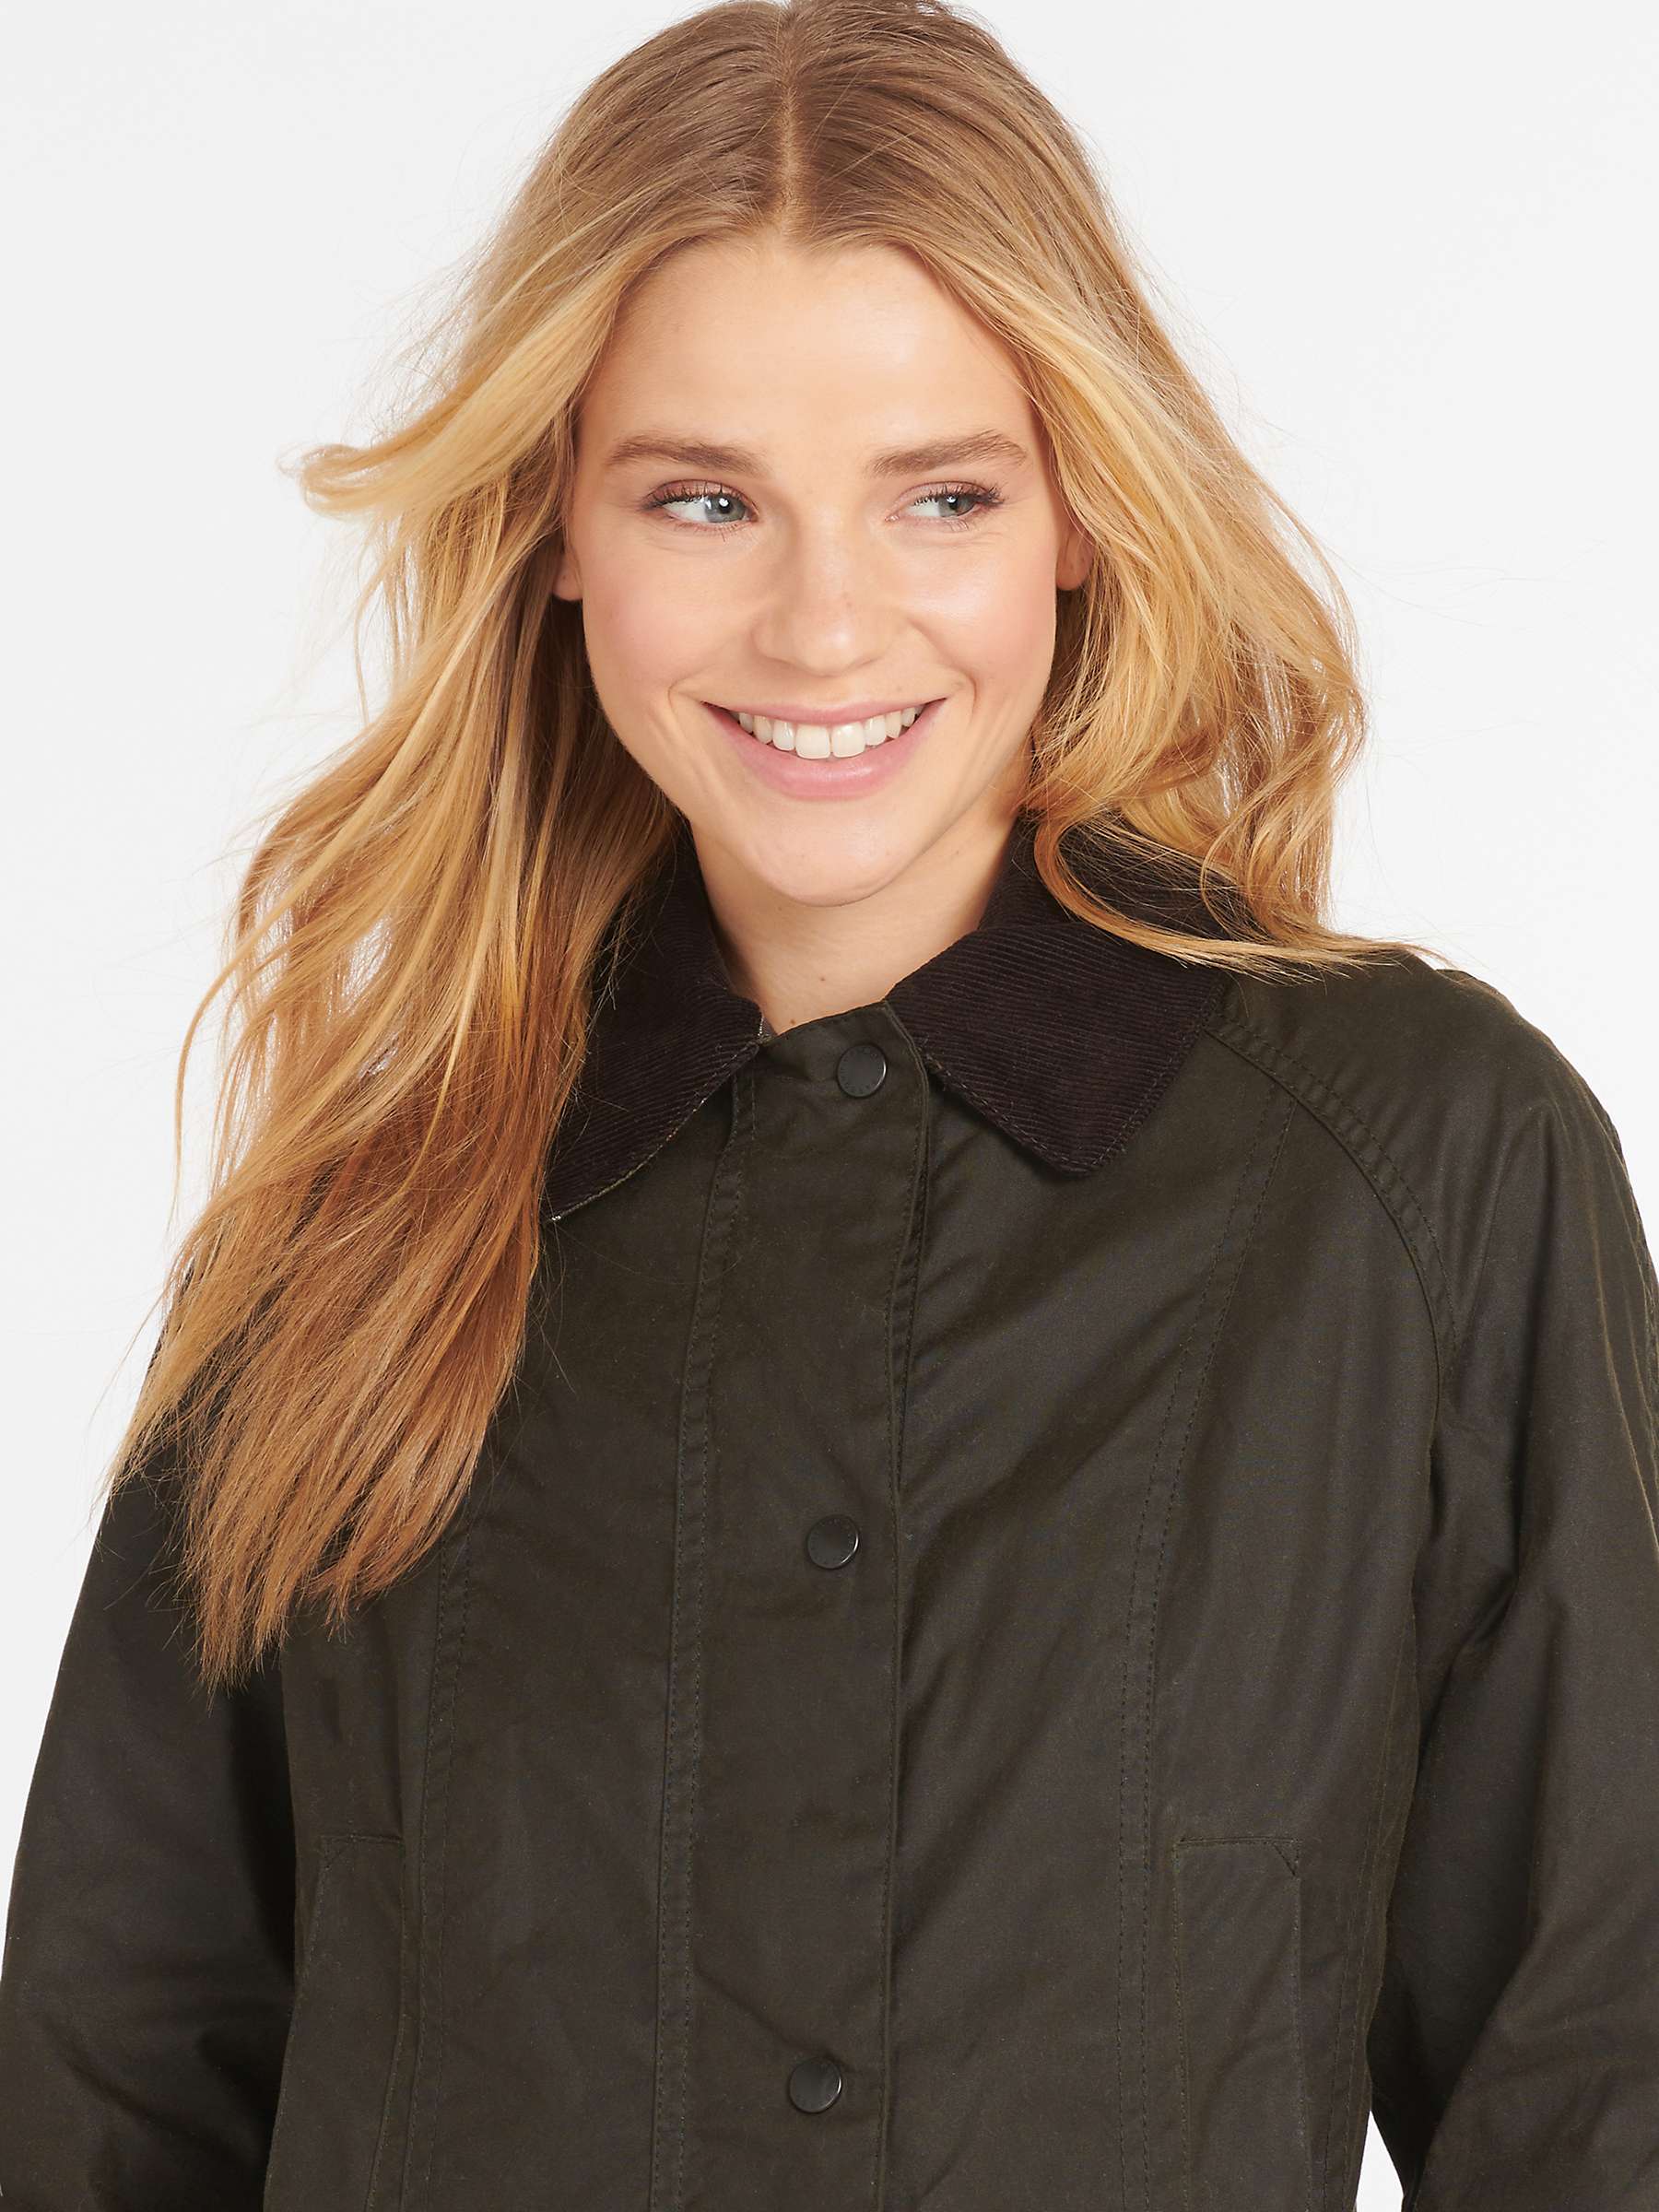 Buy Barbour Classic Beadnell Waxed Jacket, Olive Online at johnlewis.com